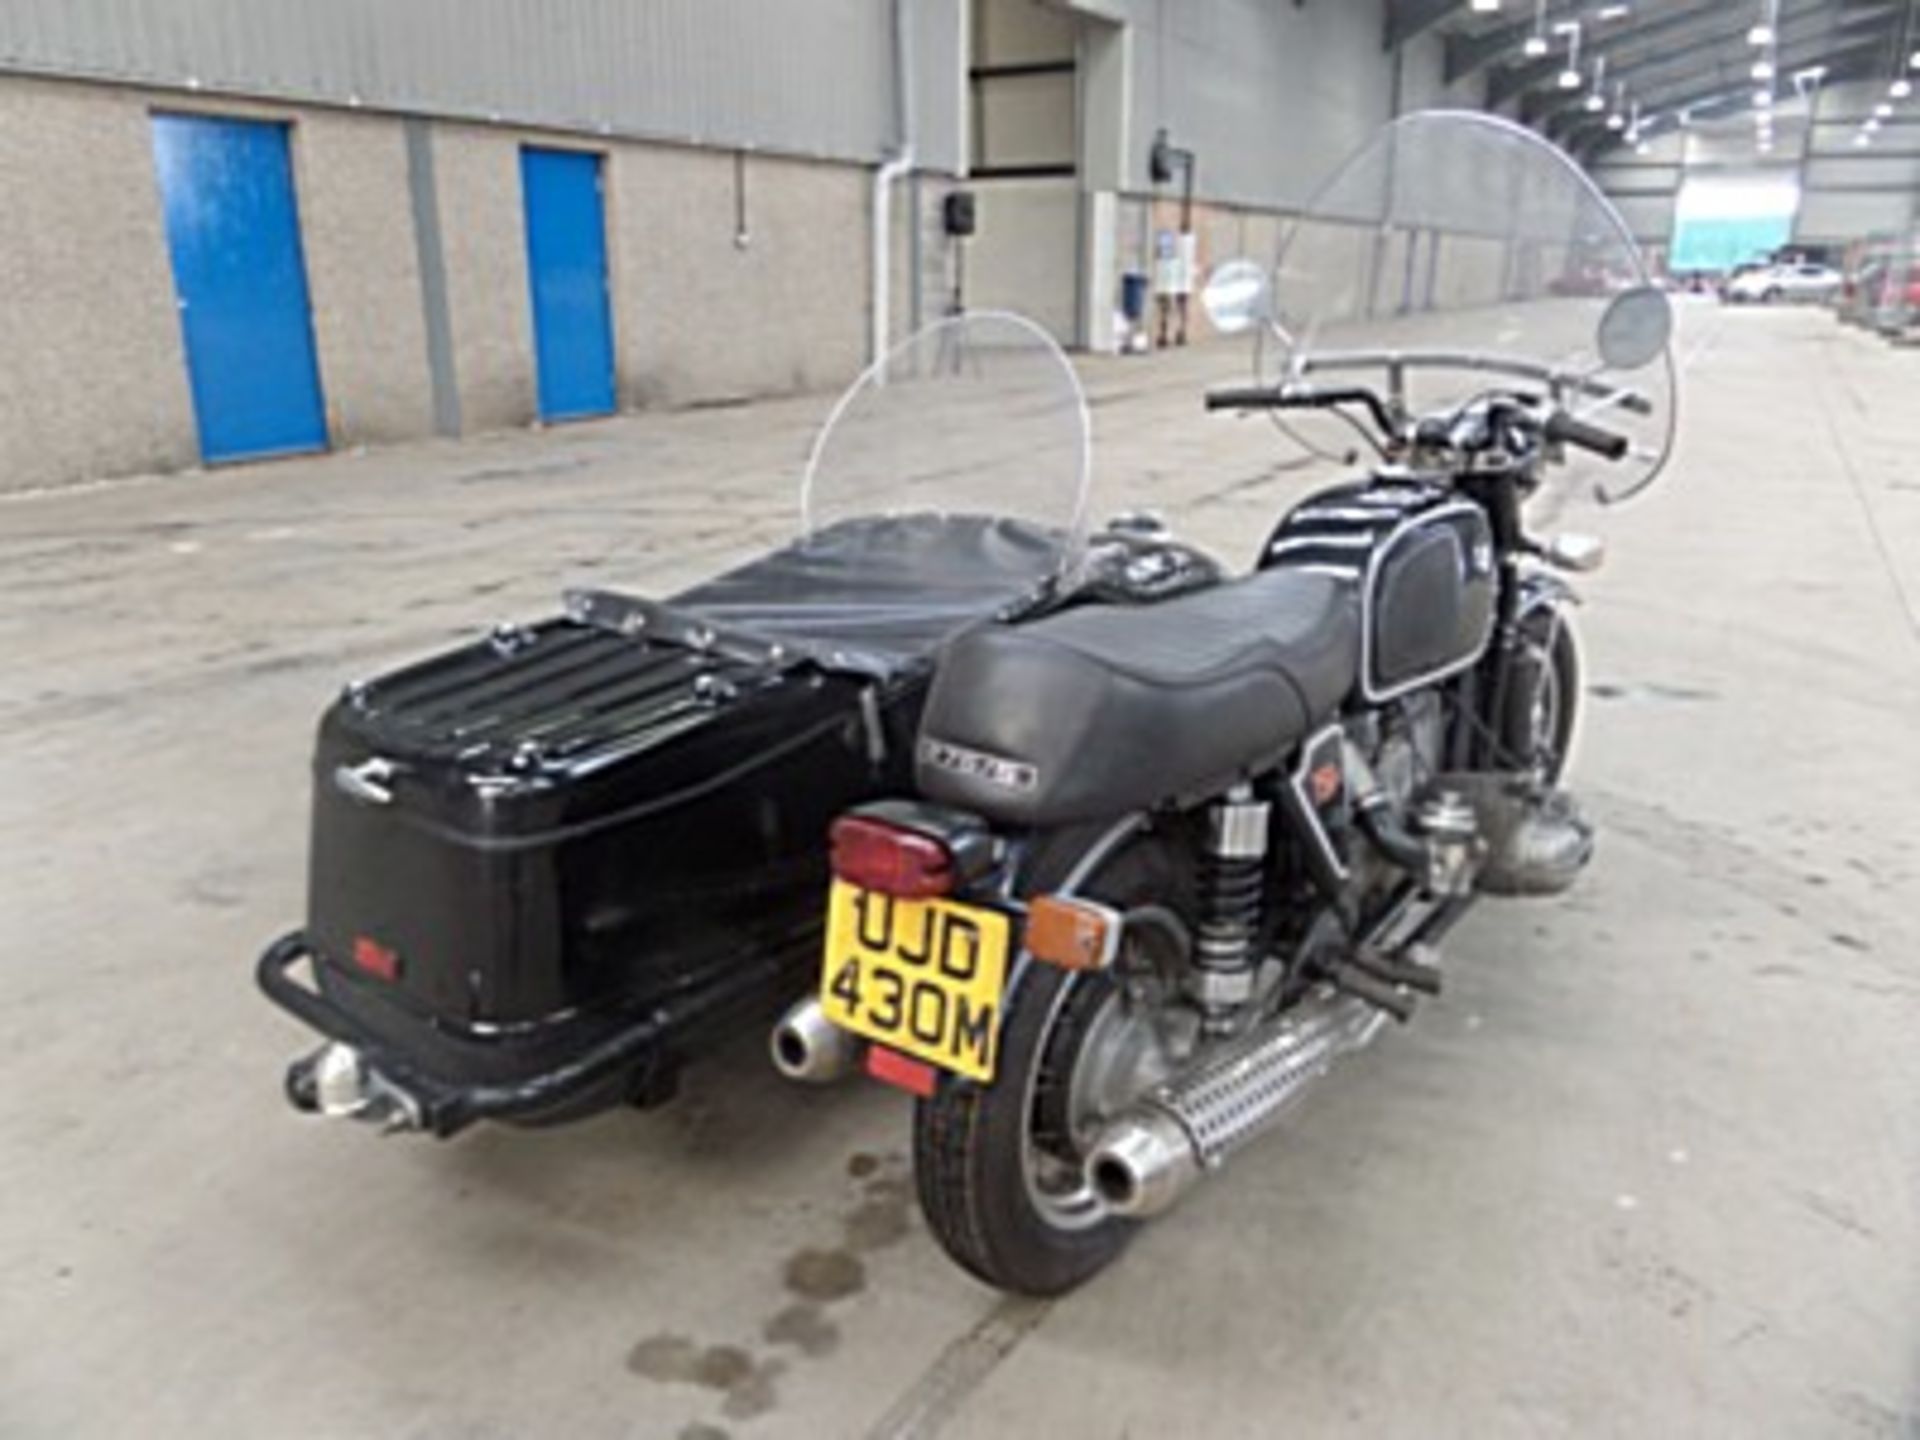 BMW, R75/5 COMBO - 745cc, Chassis number 4007988 - MOT tested until January 2017 ESTIMATE £3000 - £ - Image 3 of 11